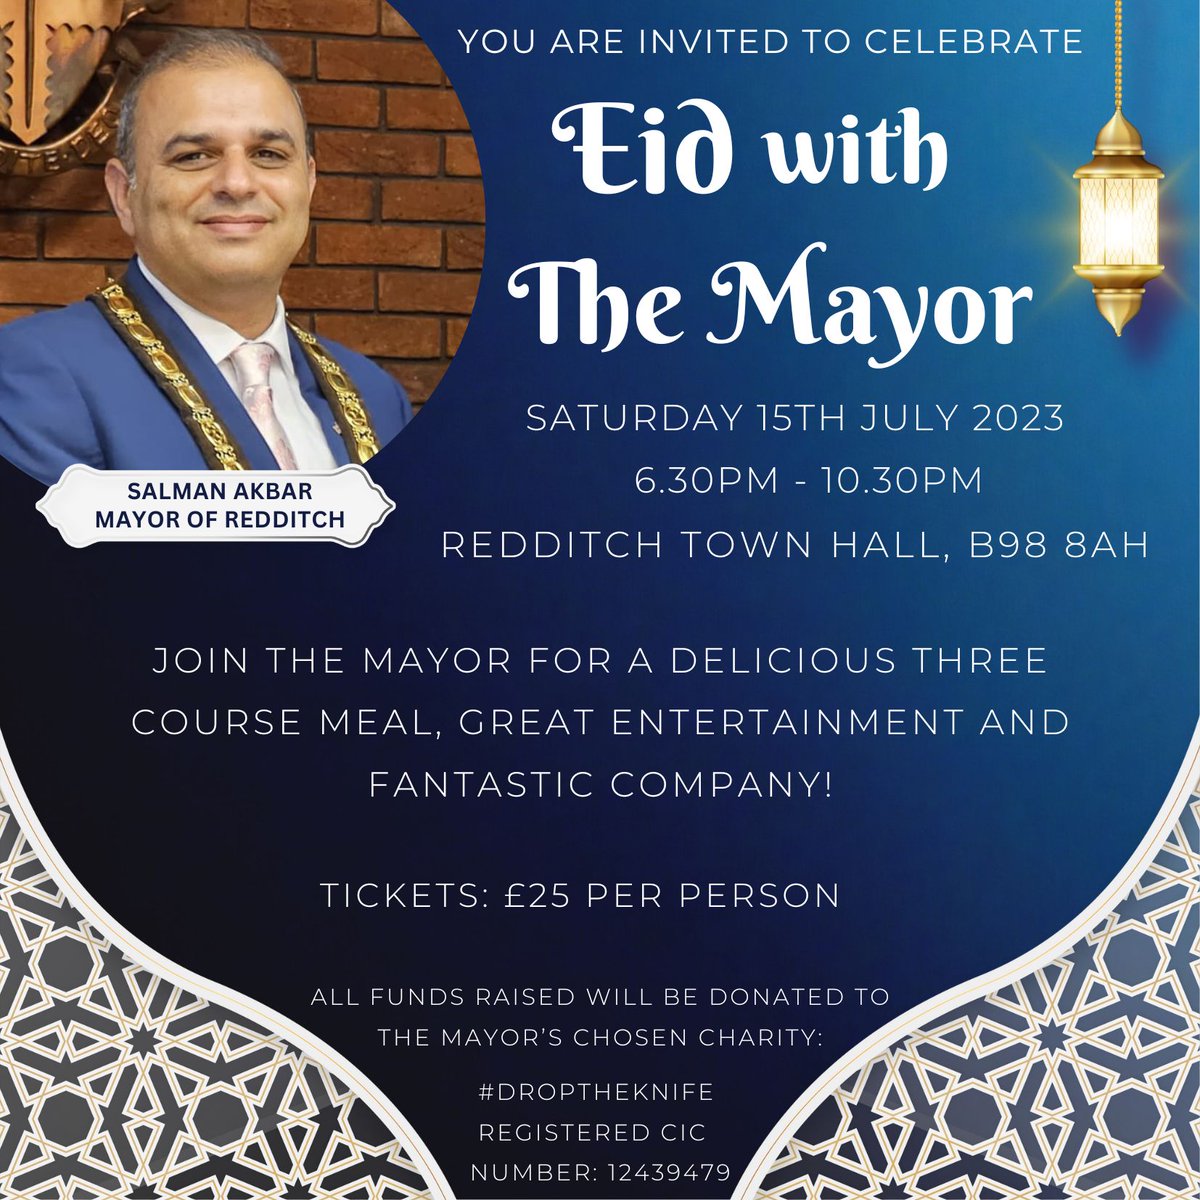 Come and join our Mayor of Redditch - Councillor Salman Akbar to celebrate Eid on the 15th July. 

All funds raised will go to Pete Martin #DropTheKnife 

Tickets £25 per person.